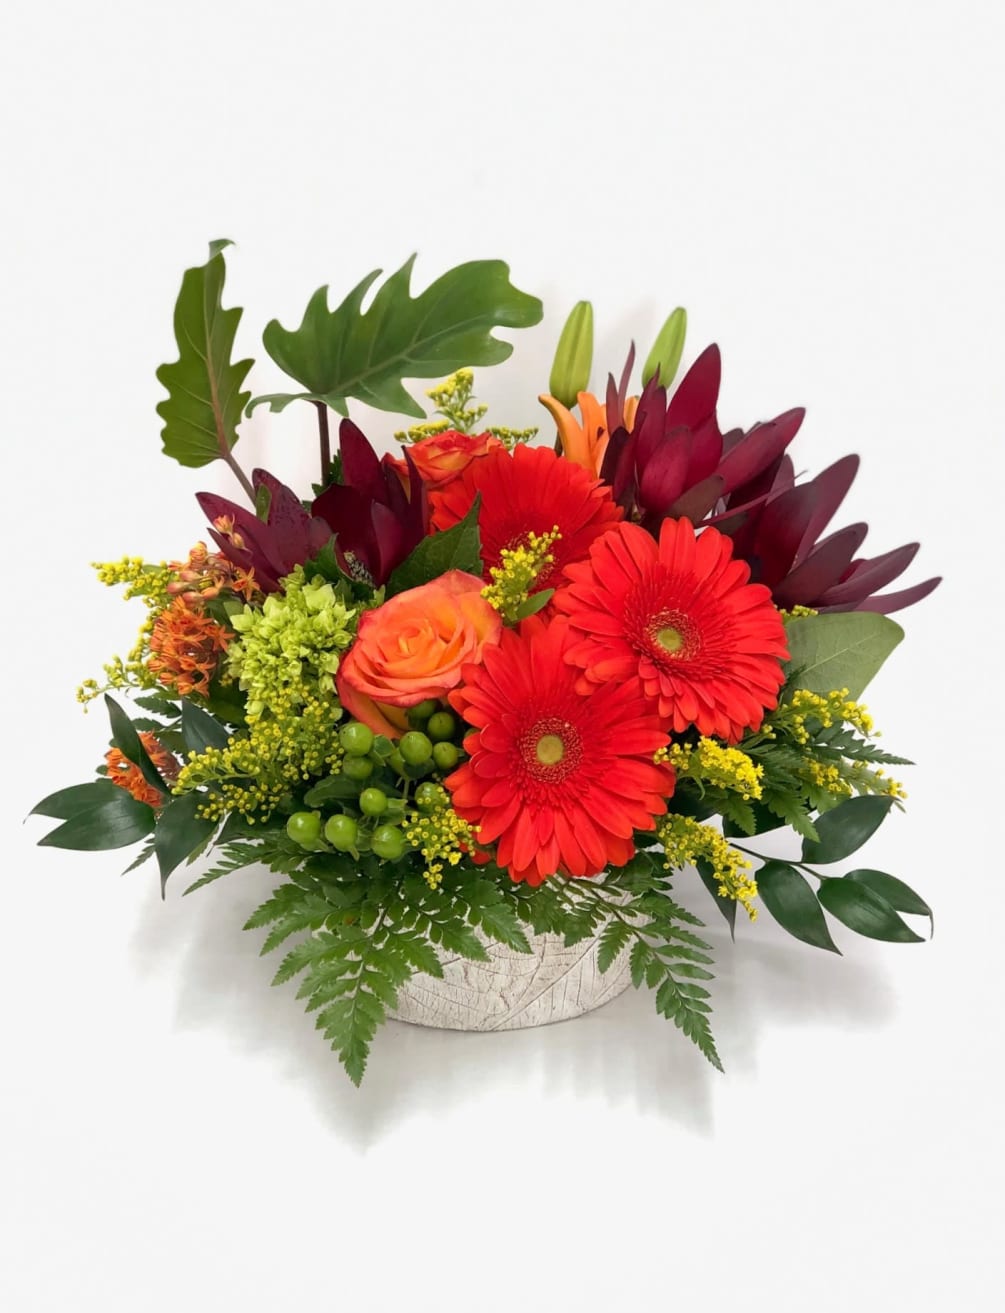 Blazing tropical colors arranged together in a nice ceramic container. Gerbers, roses